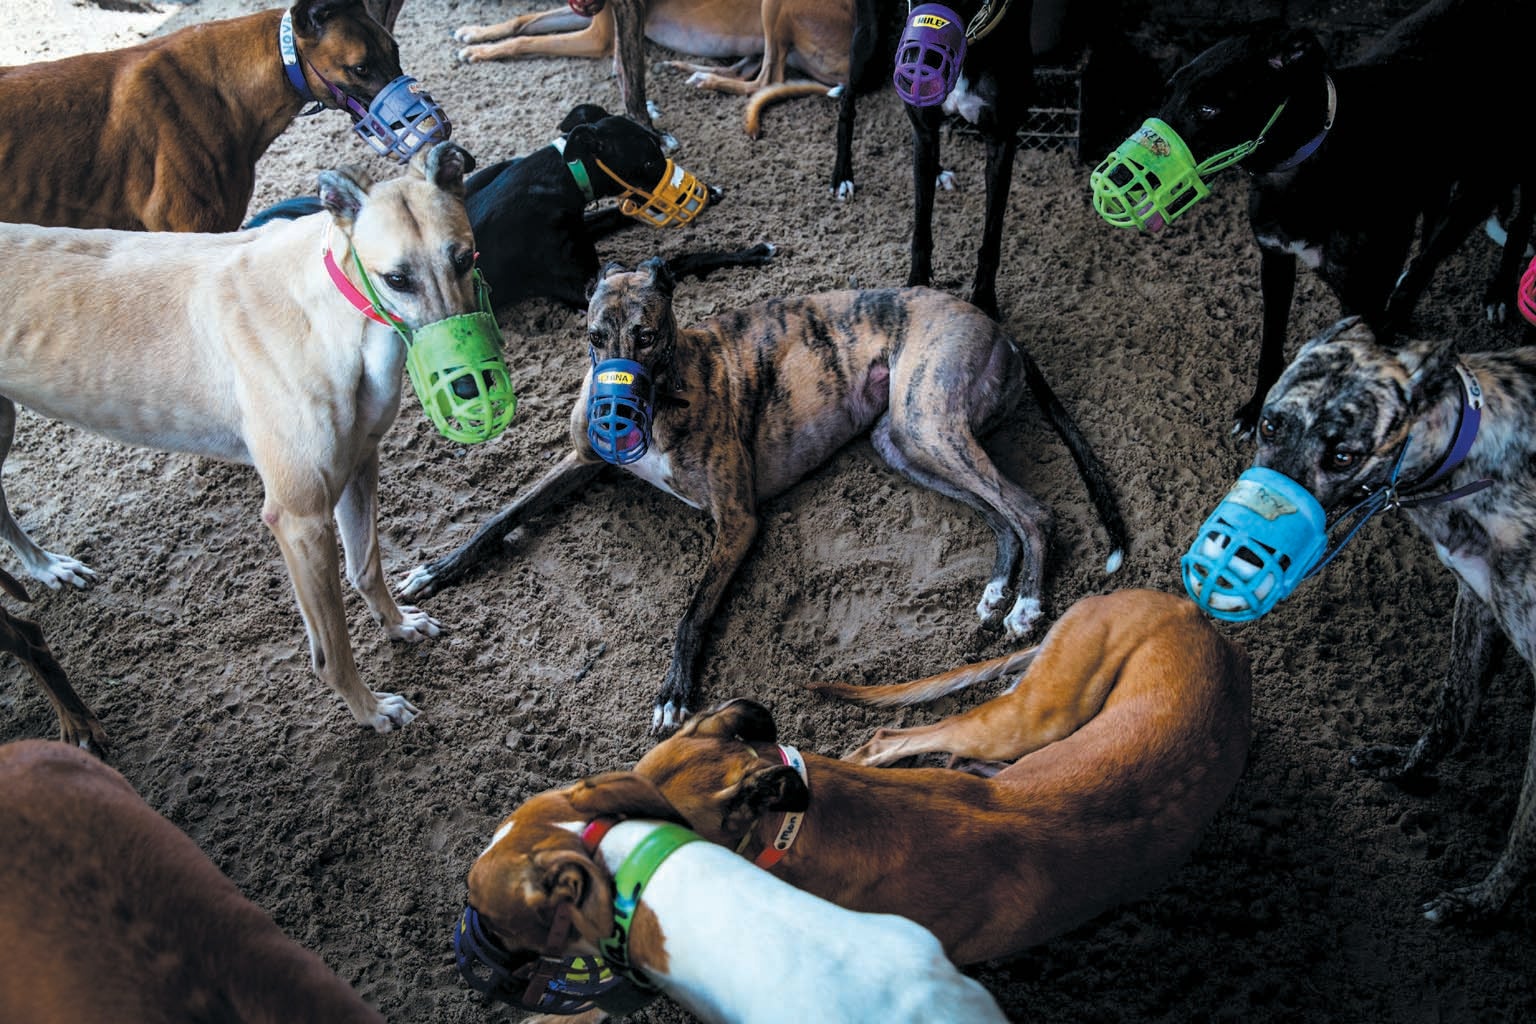 Eleven Greyhound dogs shown standing and sitting together waring muzzles.